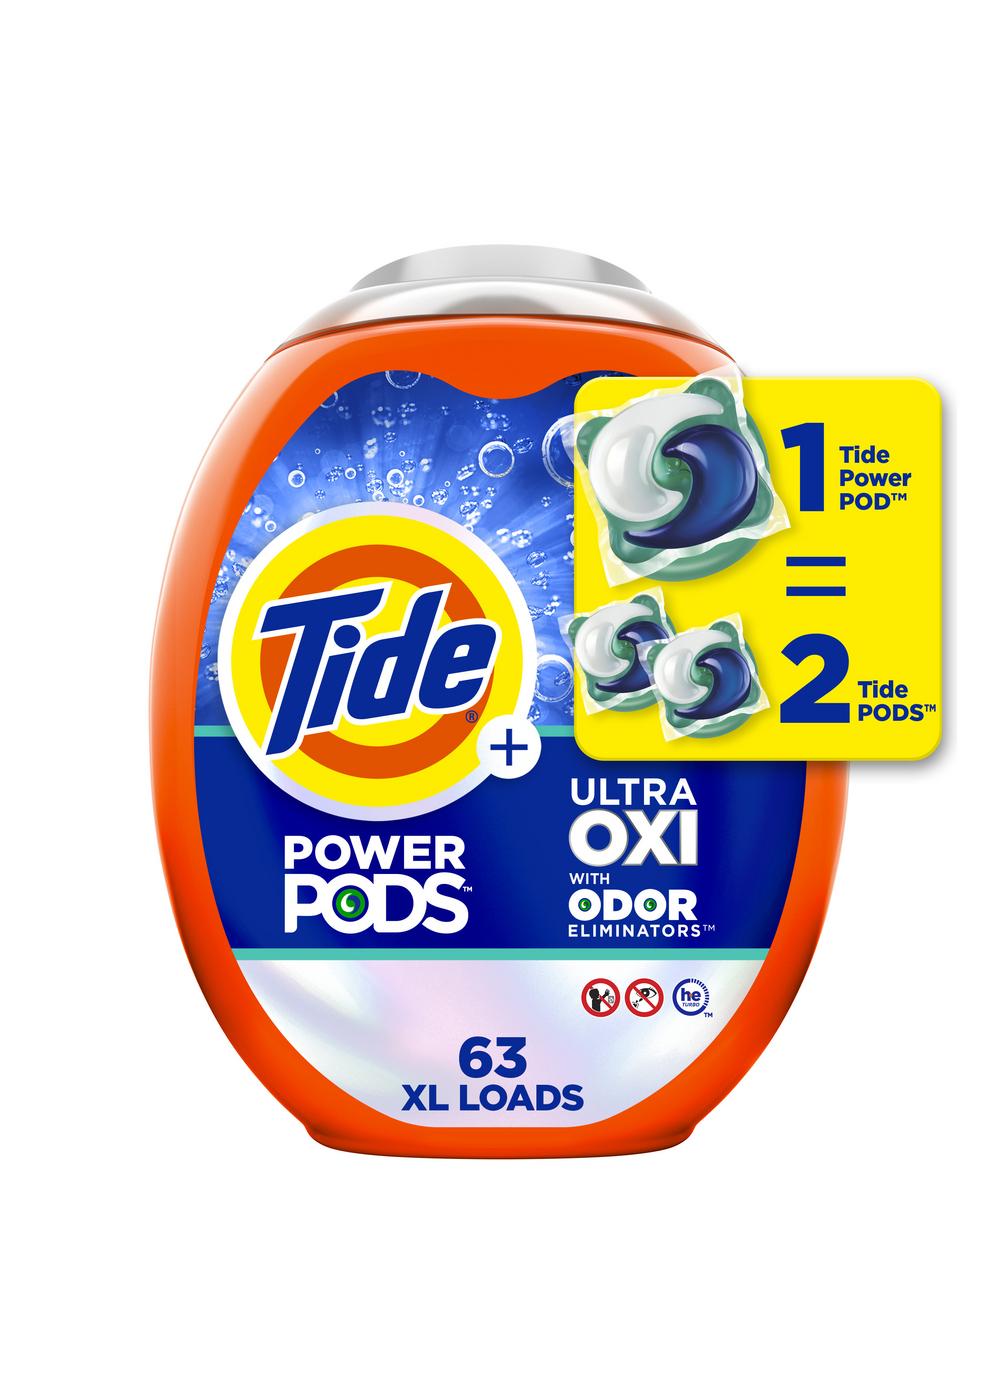 Tide Power PODS Ultra Oxi HE Laundry Detergent Pacs; image 1 of 2